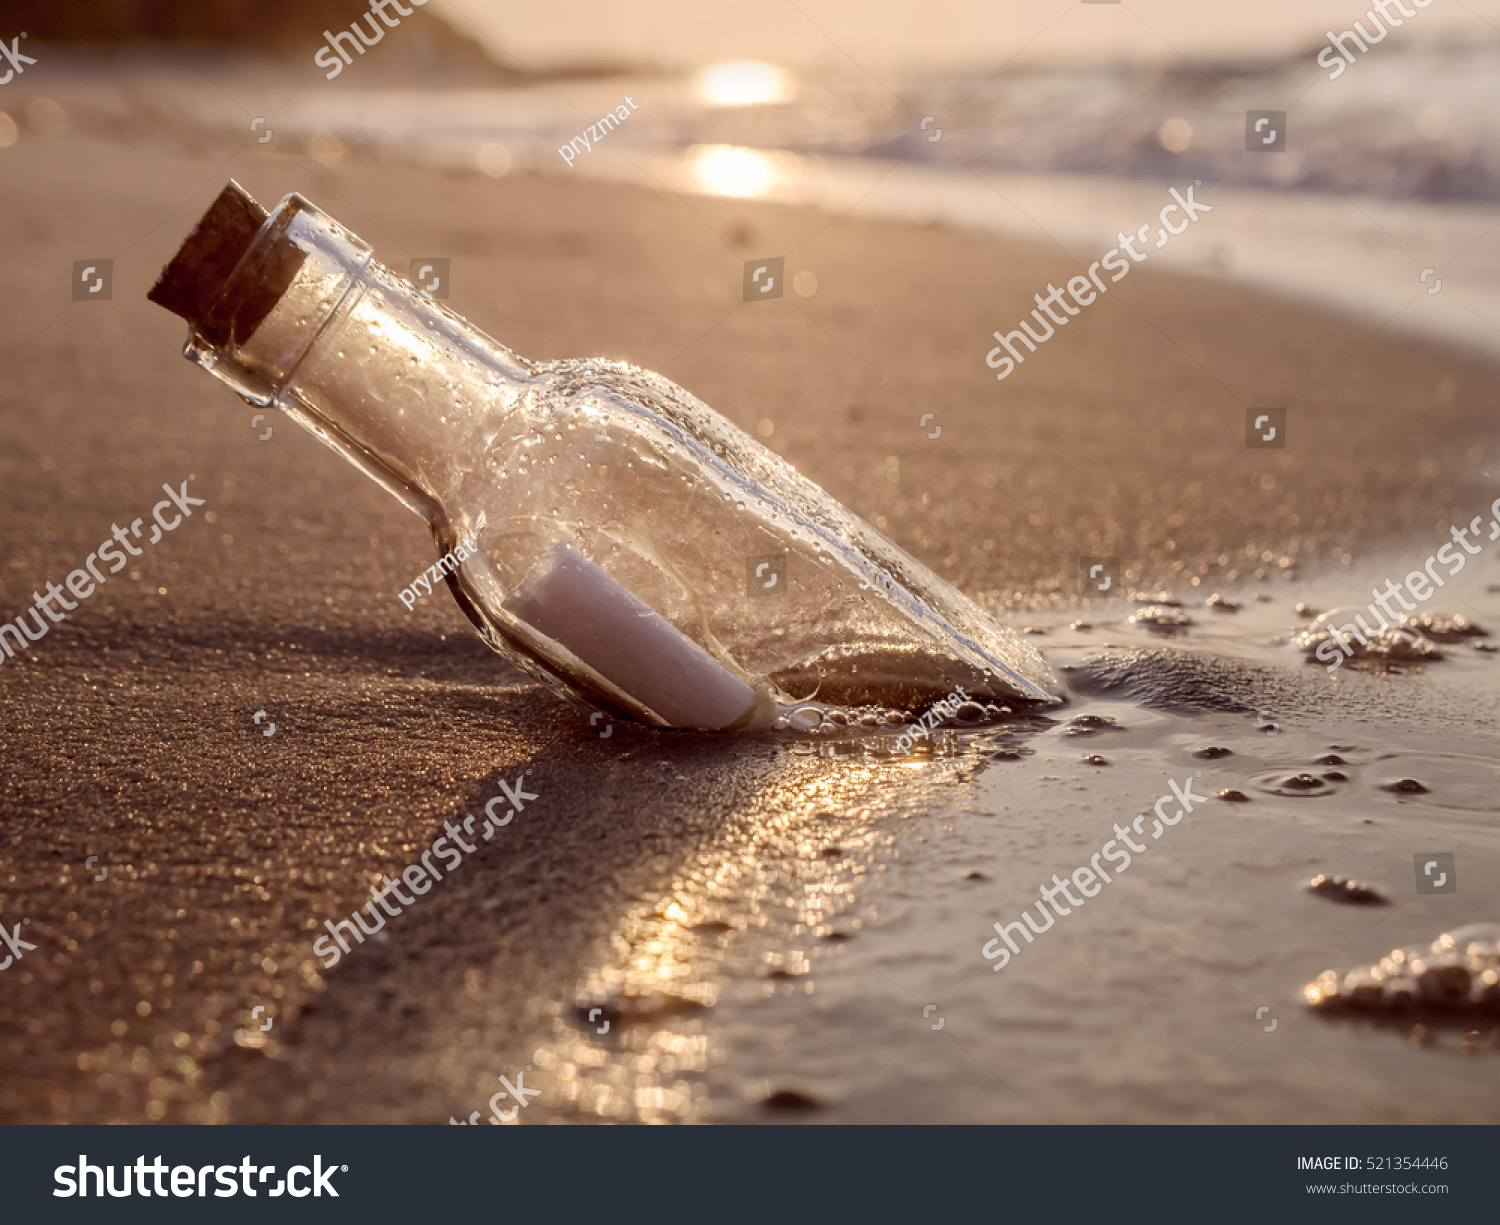 Message in the bottle washed ashore against the Sun setting down #521354446